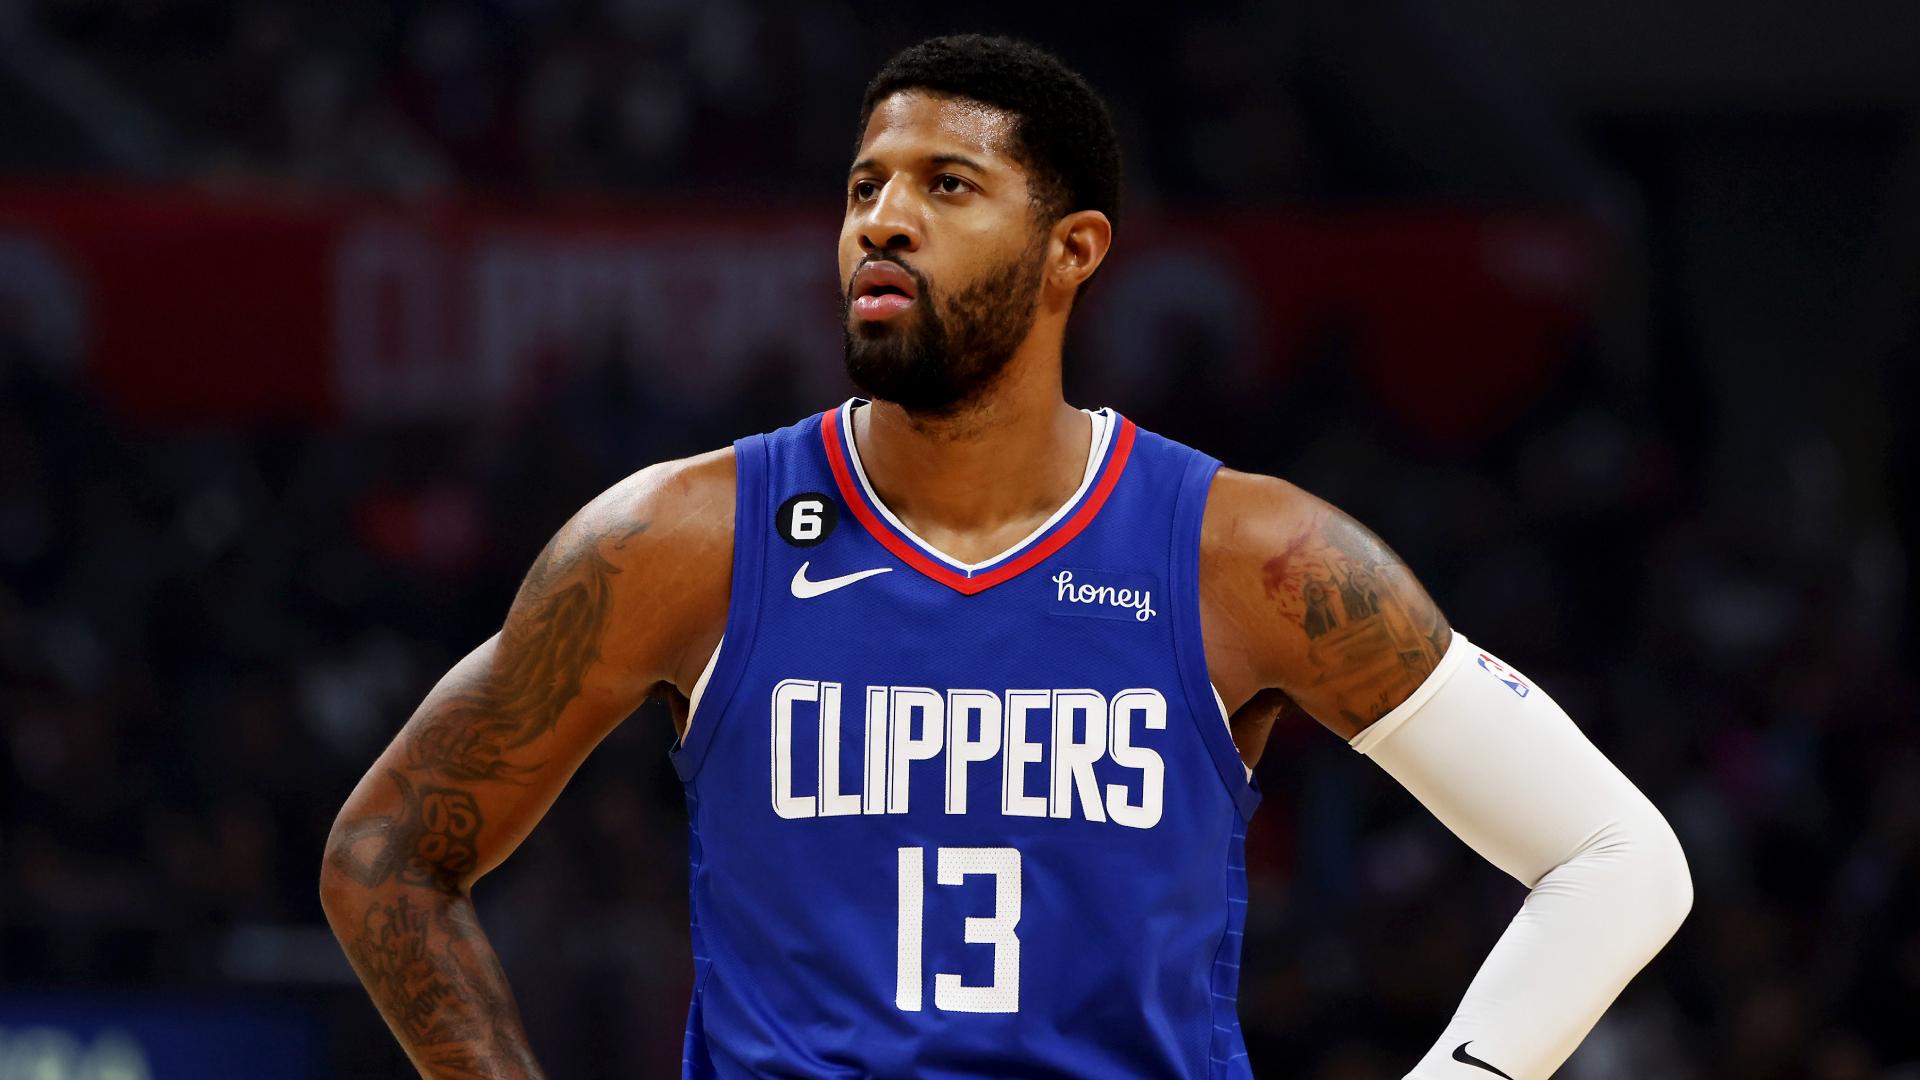 Paul George, Clippers' Paul George Trade To The Knicks In Proposal